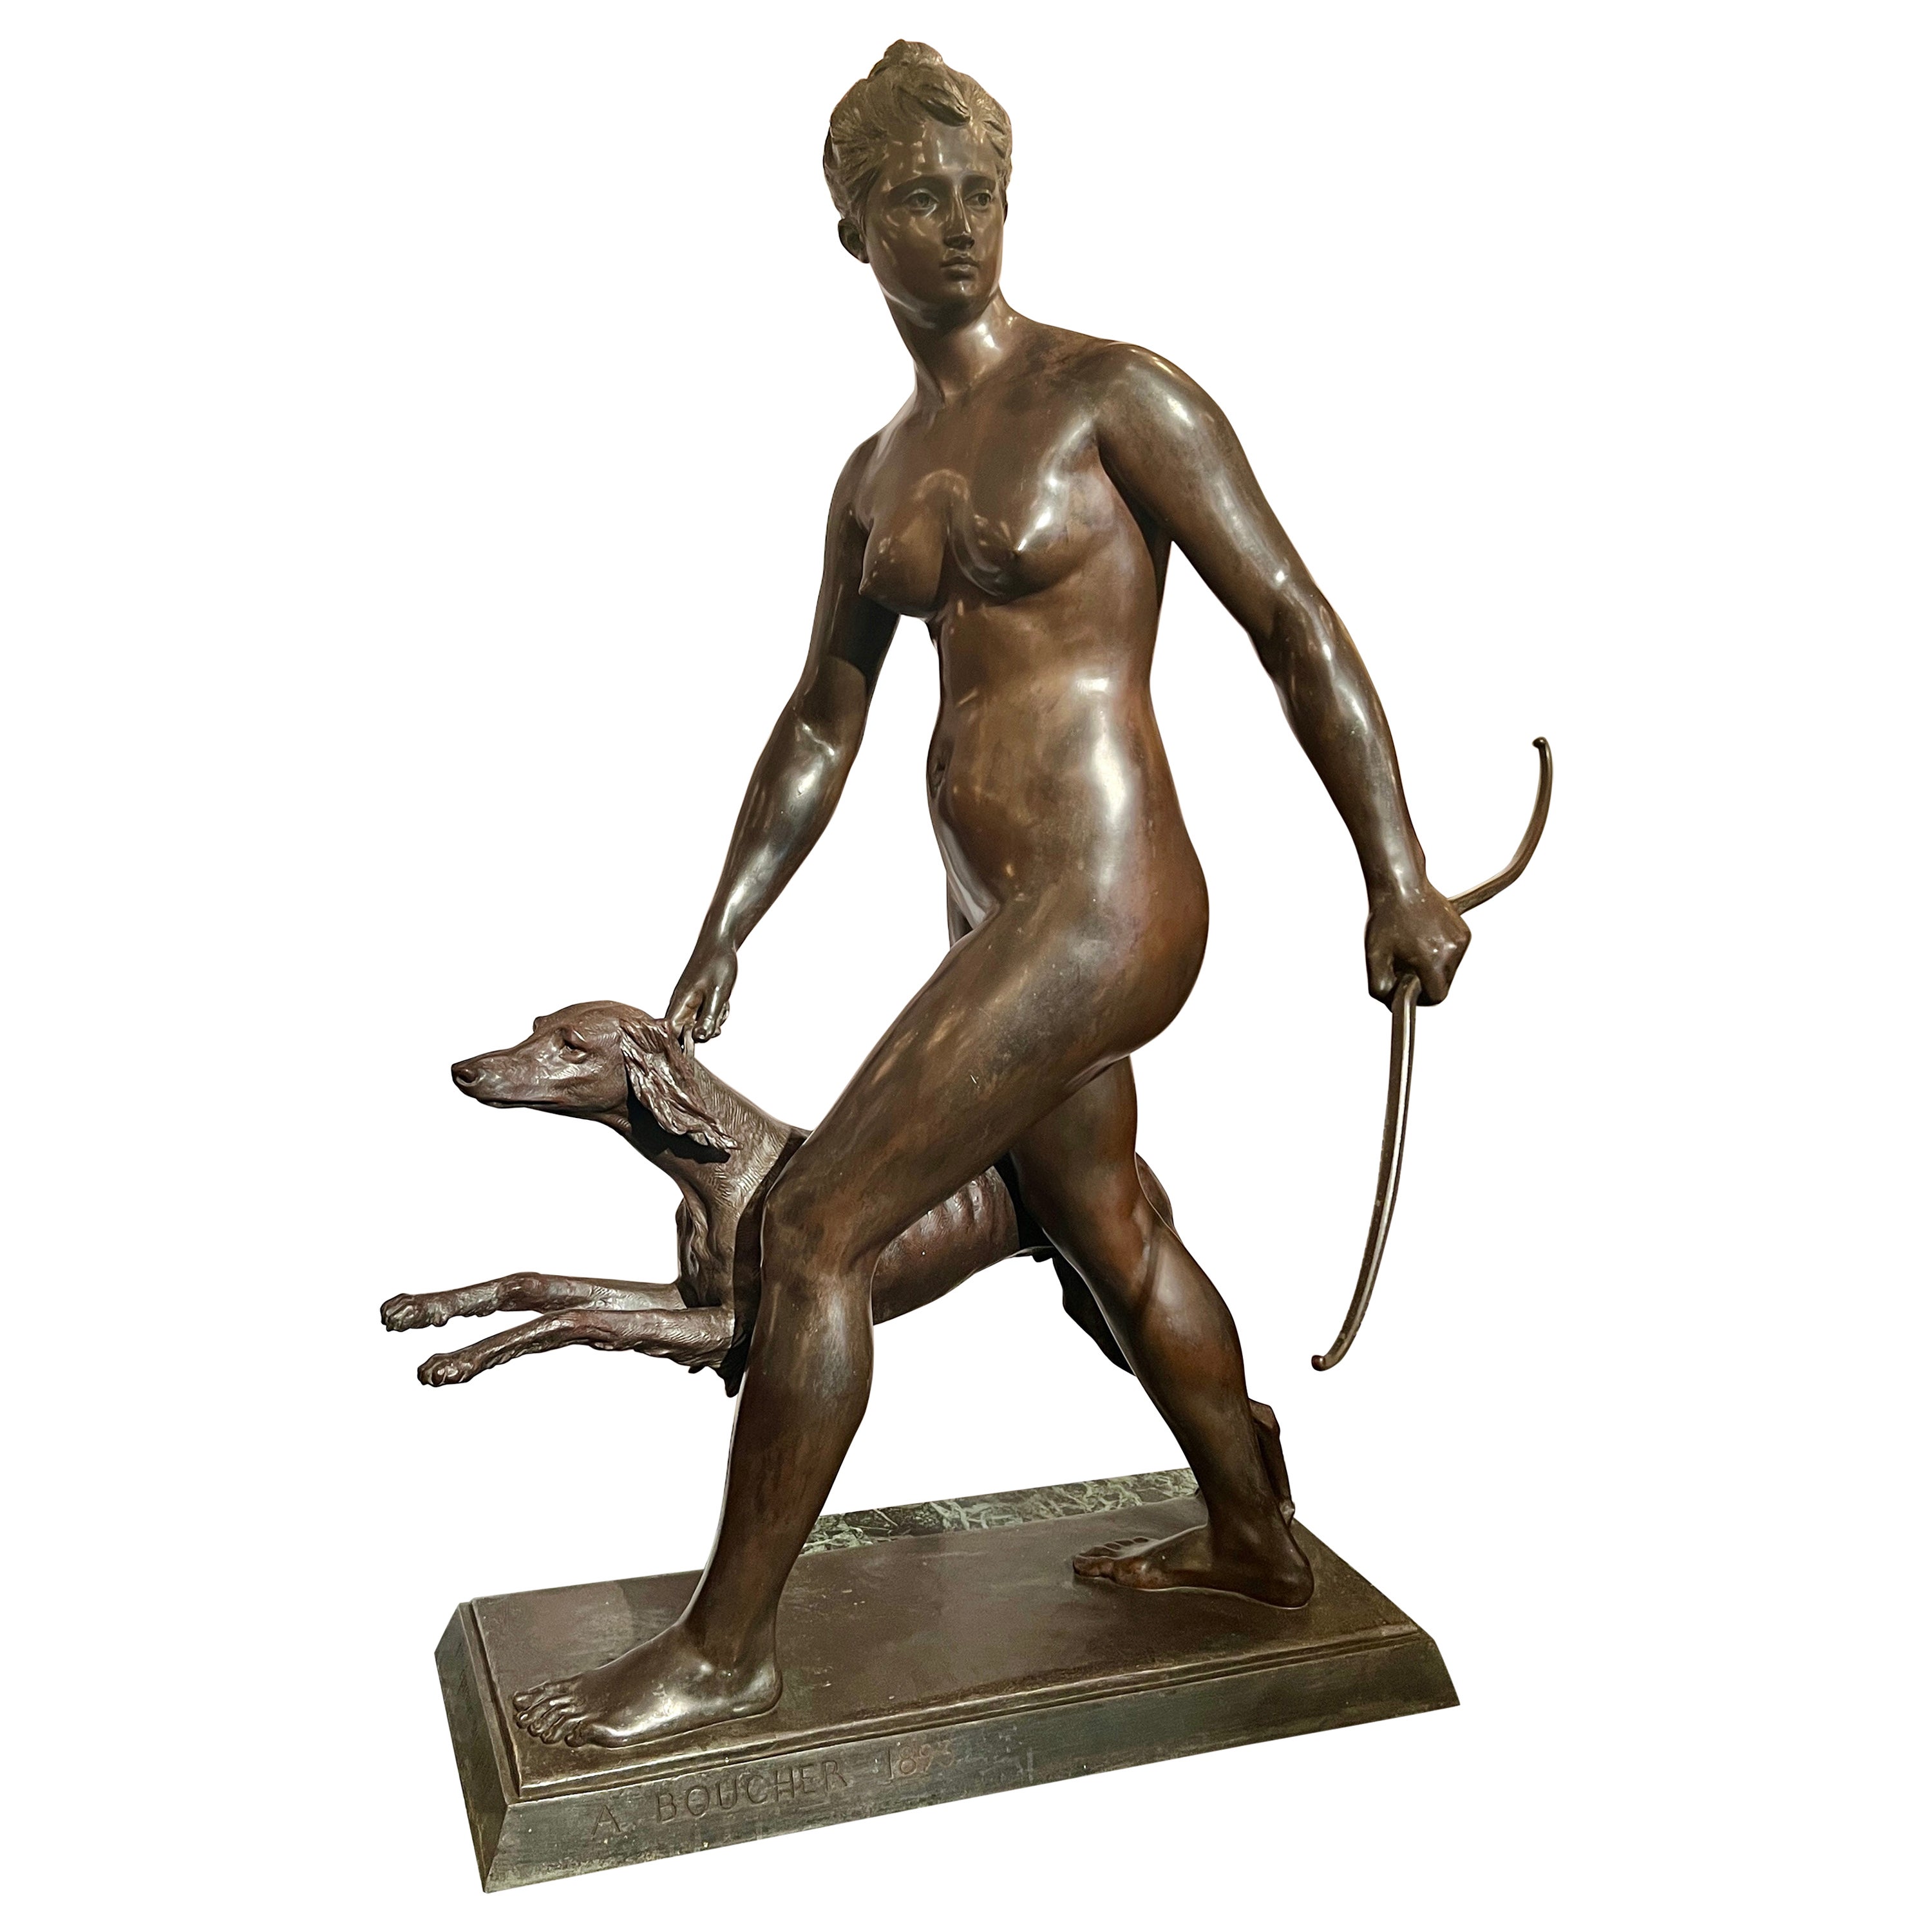 Antique French Alfred Boucher (1850-1934) Bronze Sculpture, "Diana the Huntress" For Sale